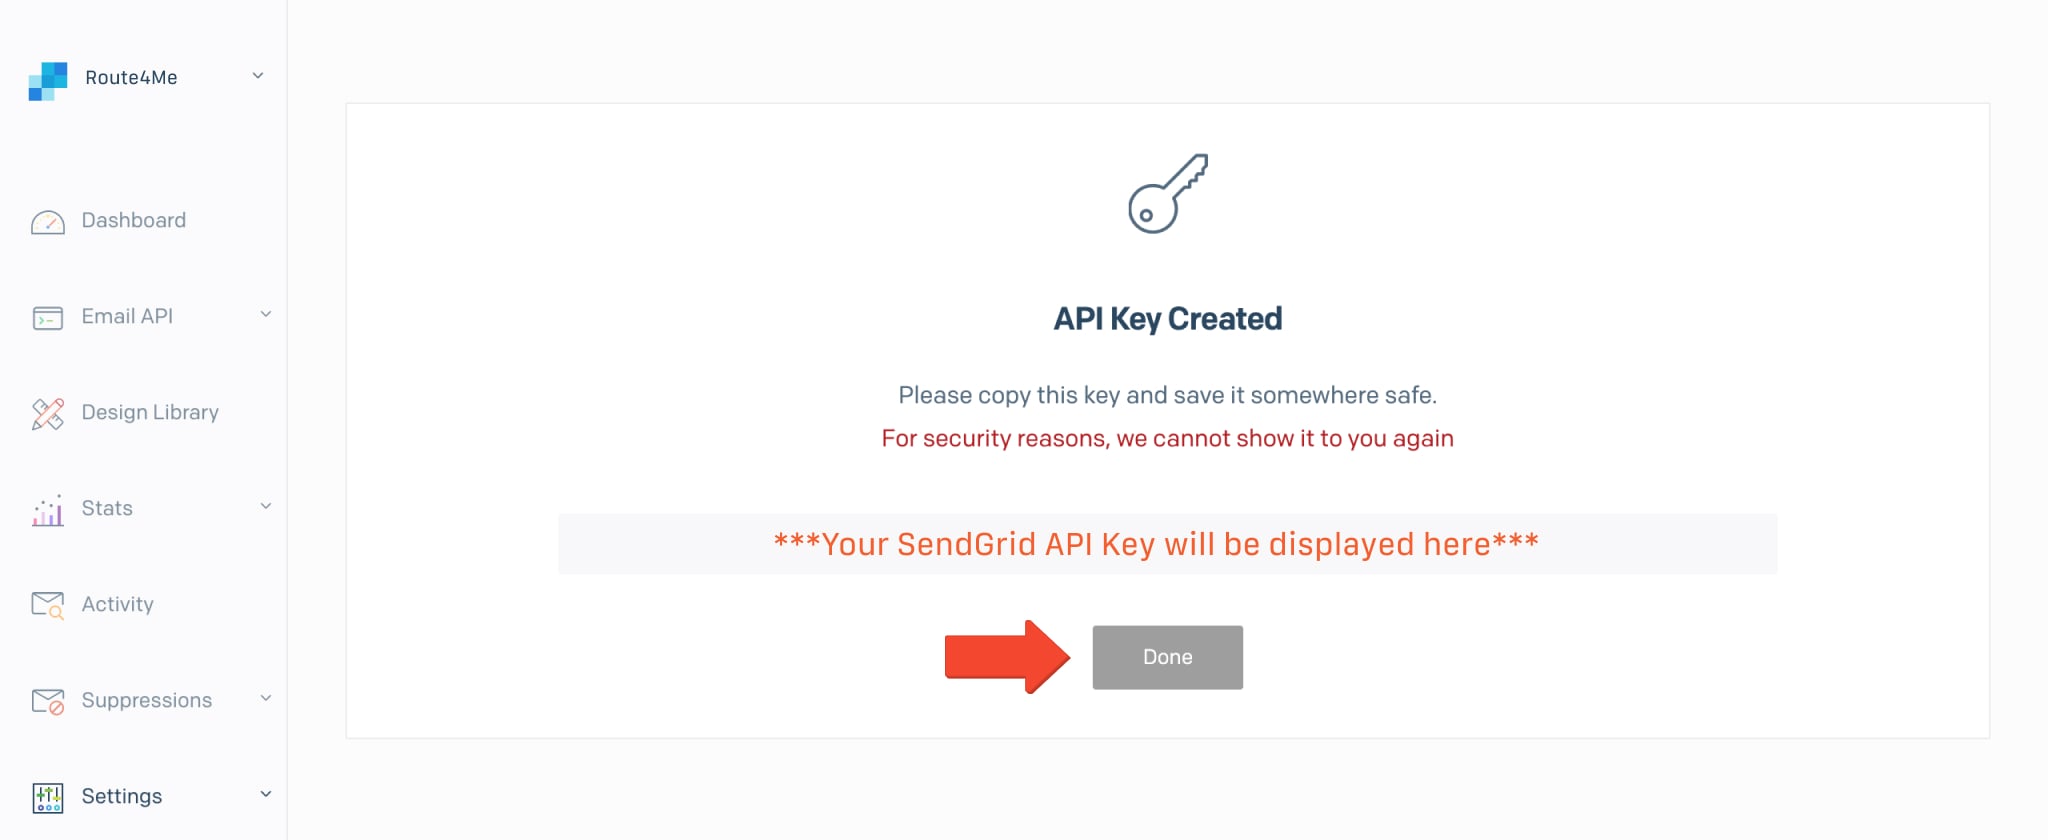 Make sure that you save your SendGrid API key to use it for your Route4Me Notifications.